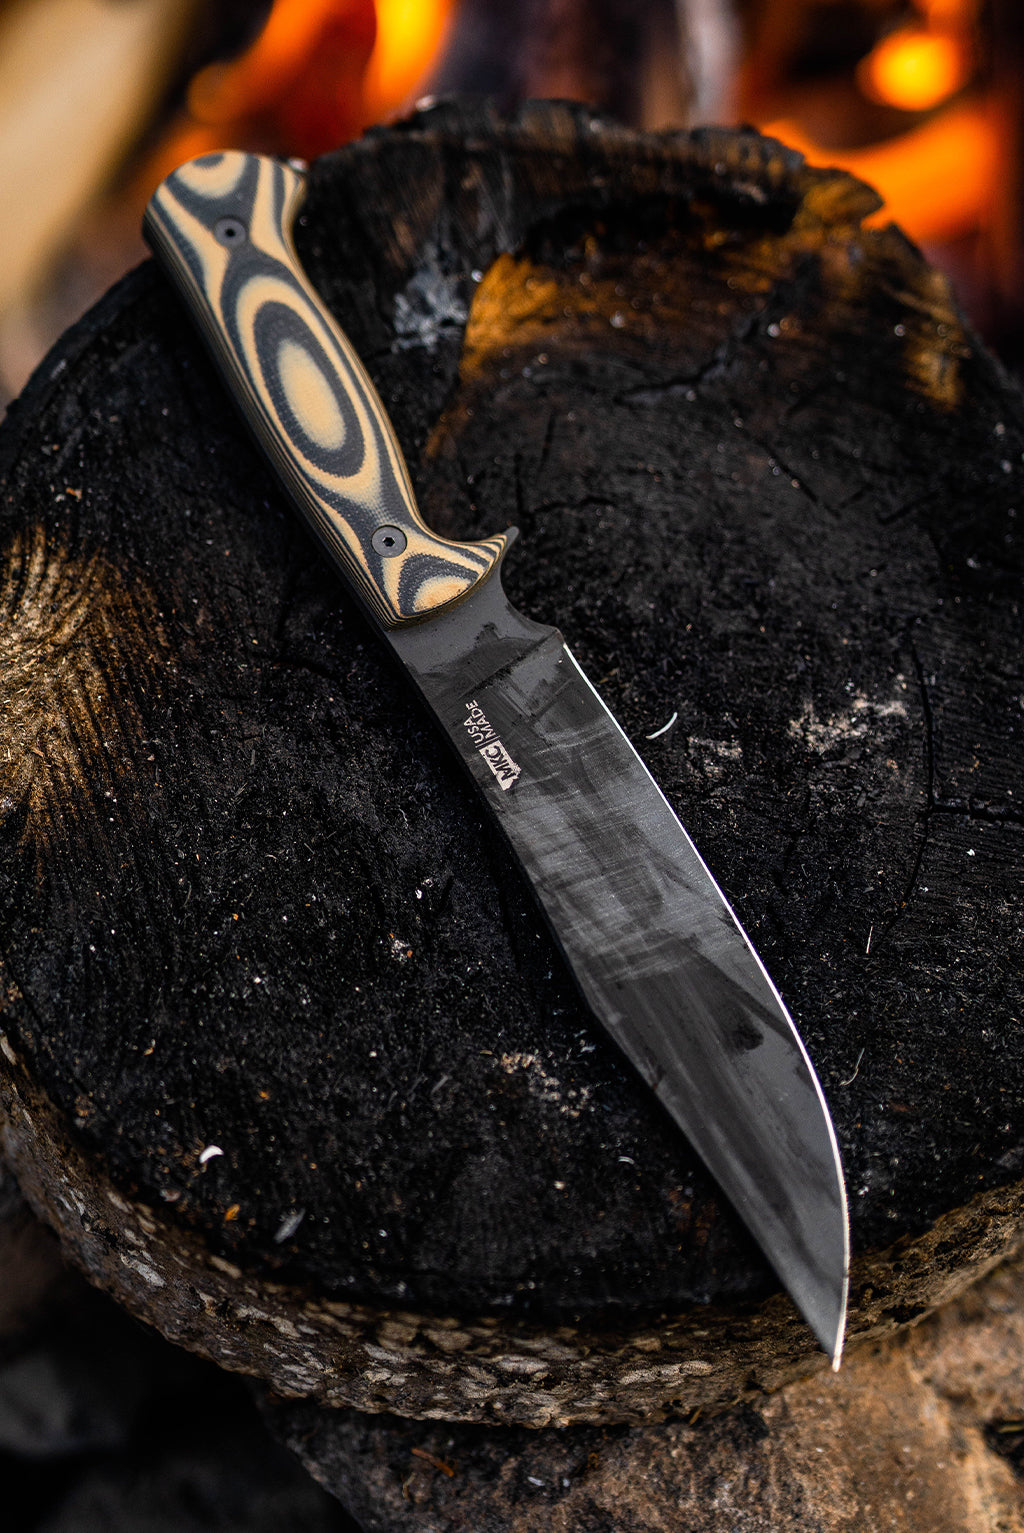 MARHSALL TANBLACK 01 How to Choose the Best Bushcraft Knife: 5 Things to Know